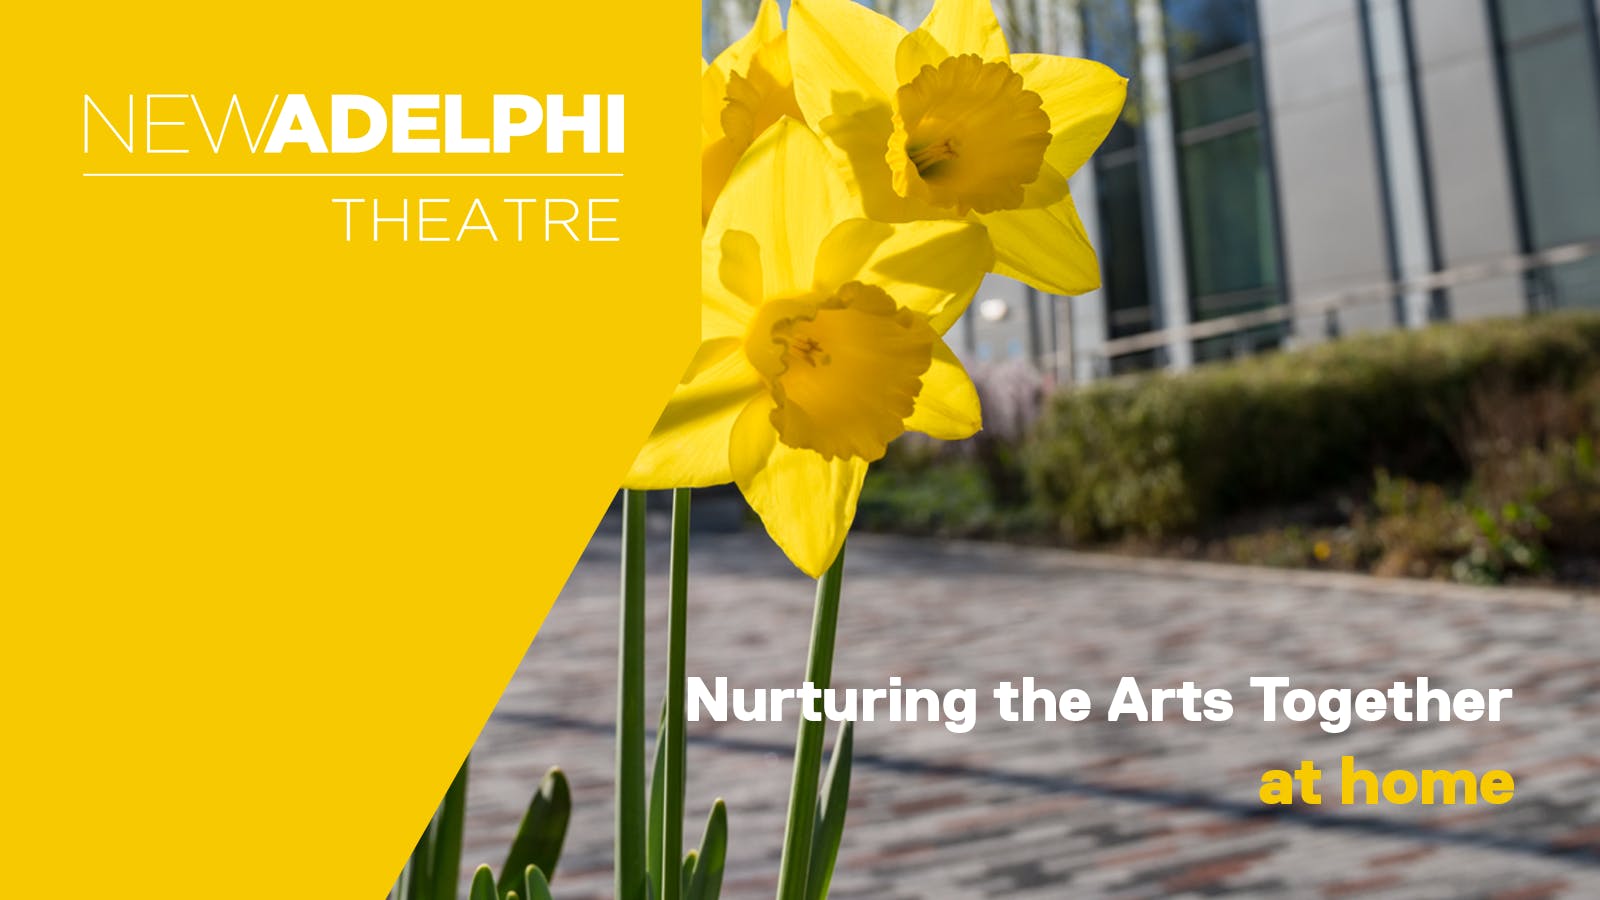 Blog: Nurturing the Arts Together at Home #3 - New Adelphi Theatre